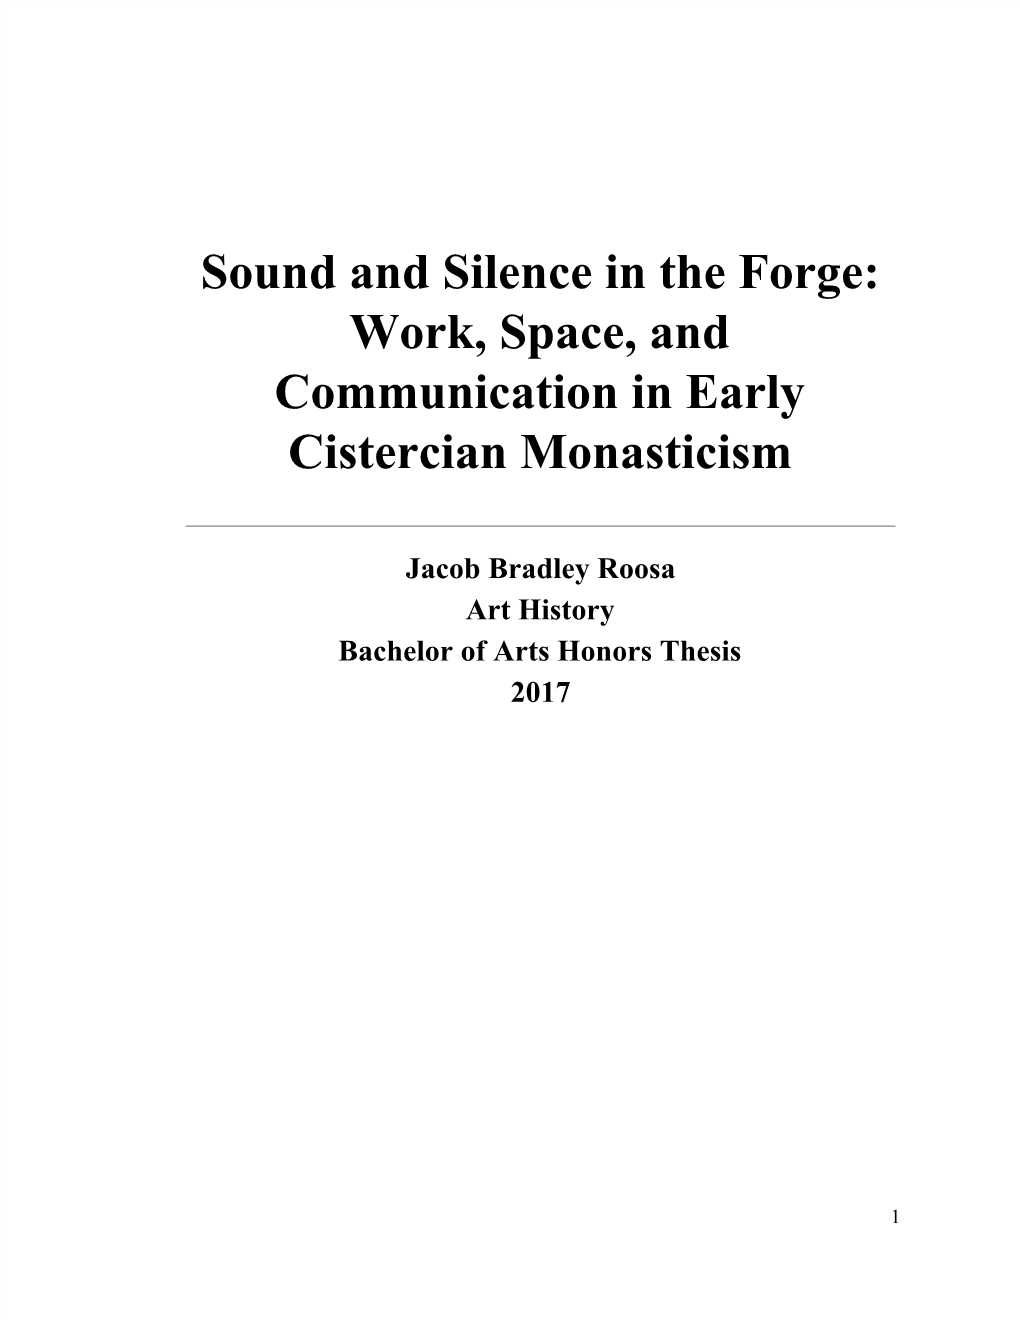 Sound and Silence in the Forge: Work, Space, and Communication in Early Cistercian Monasticism